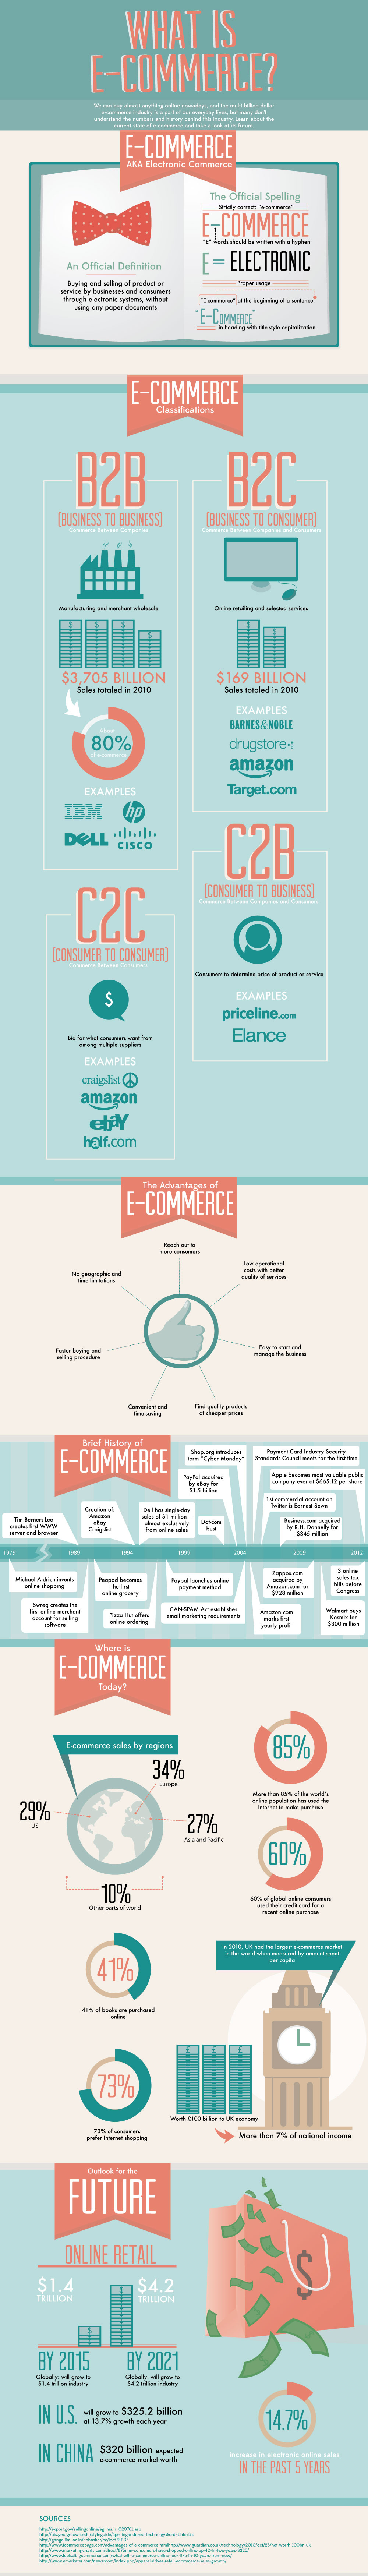 What-Is-E-Commerce-Infographic.jpg